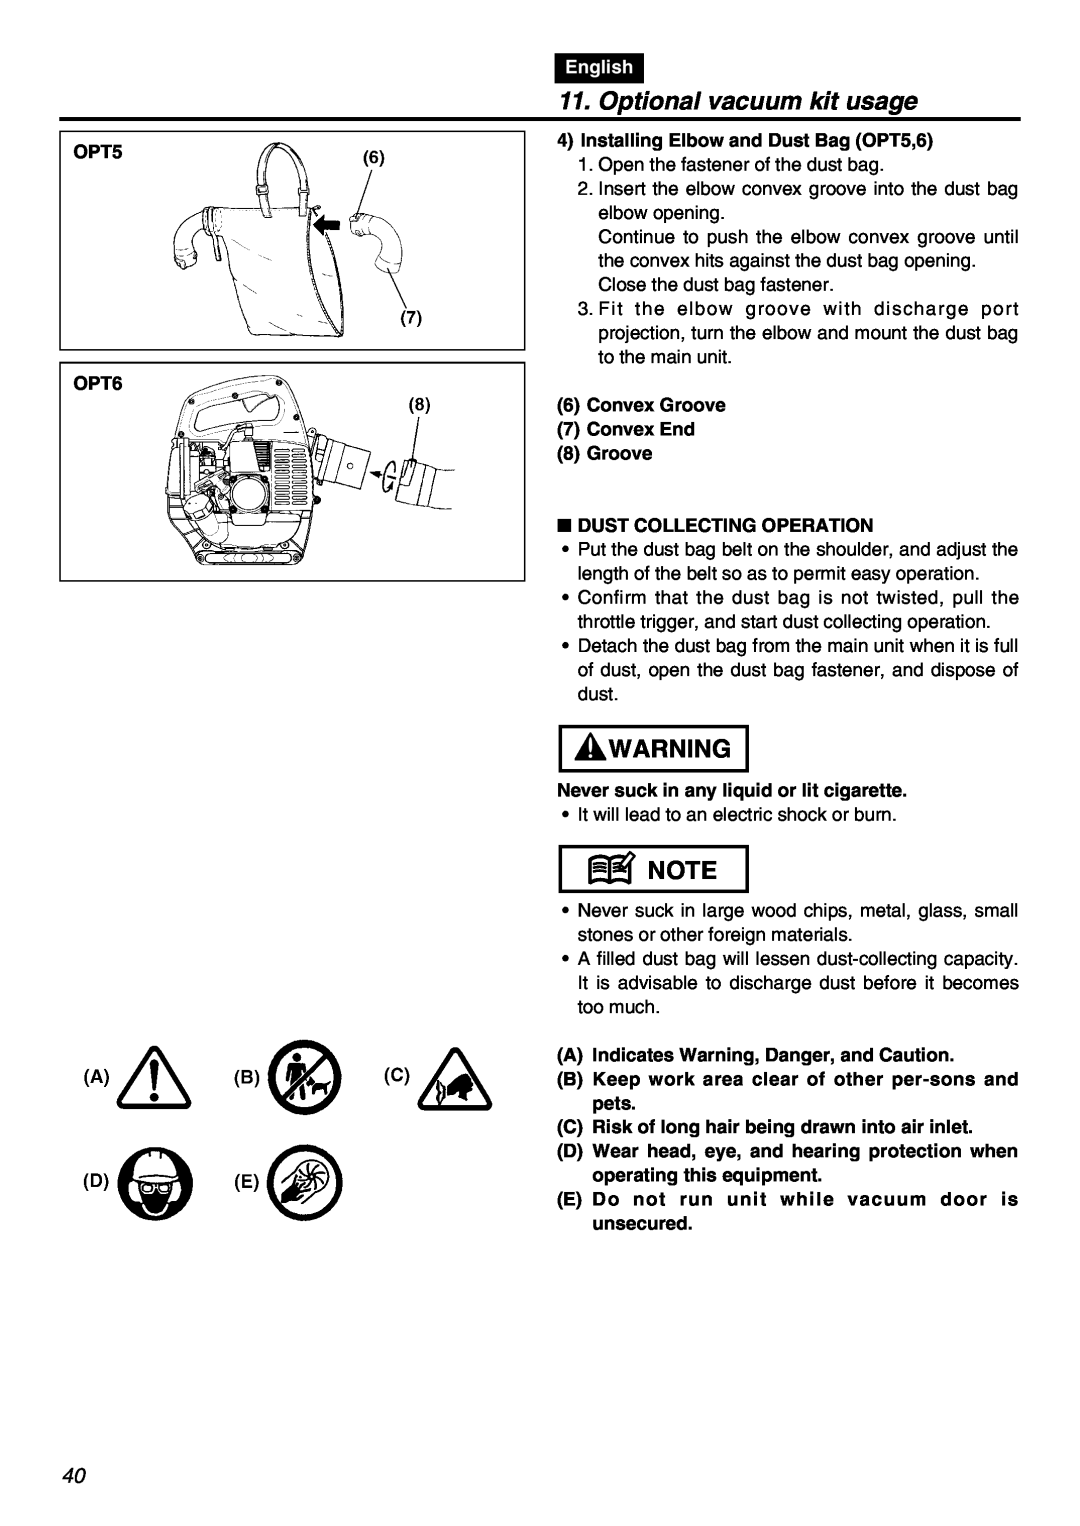 RedMax HBZ2601 manual Optional vacuum kit usage, OPT5 OPT6, English, 4Installing Elbow and Dust Bag OPT5,6 